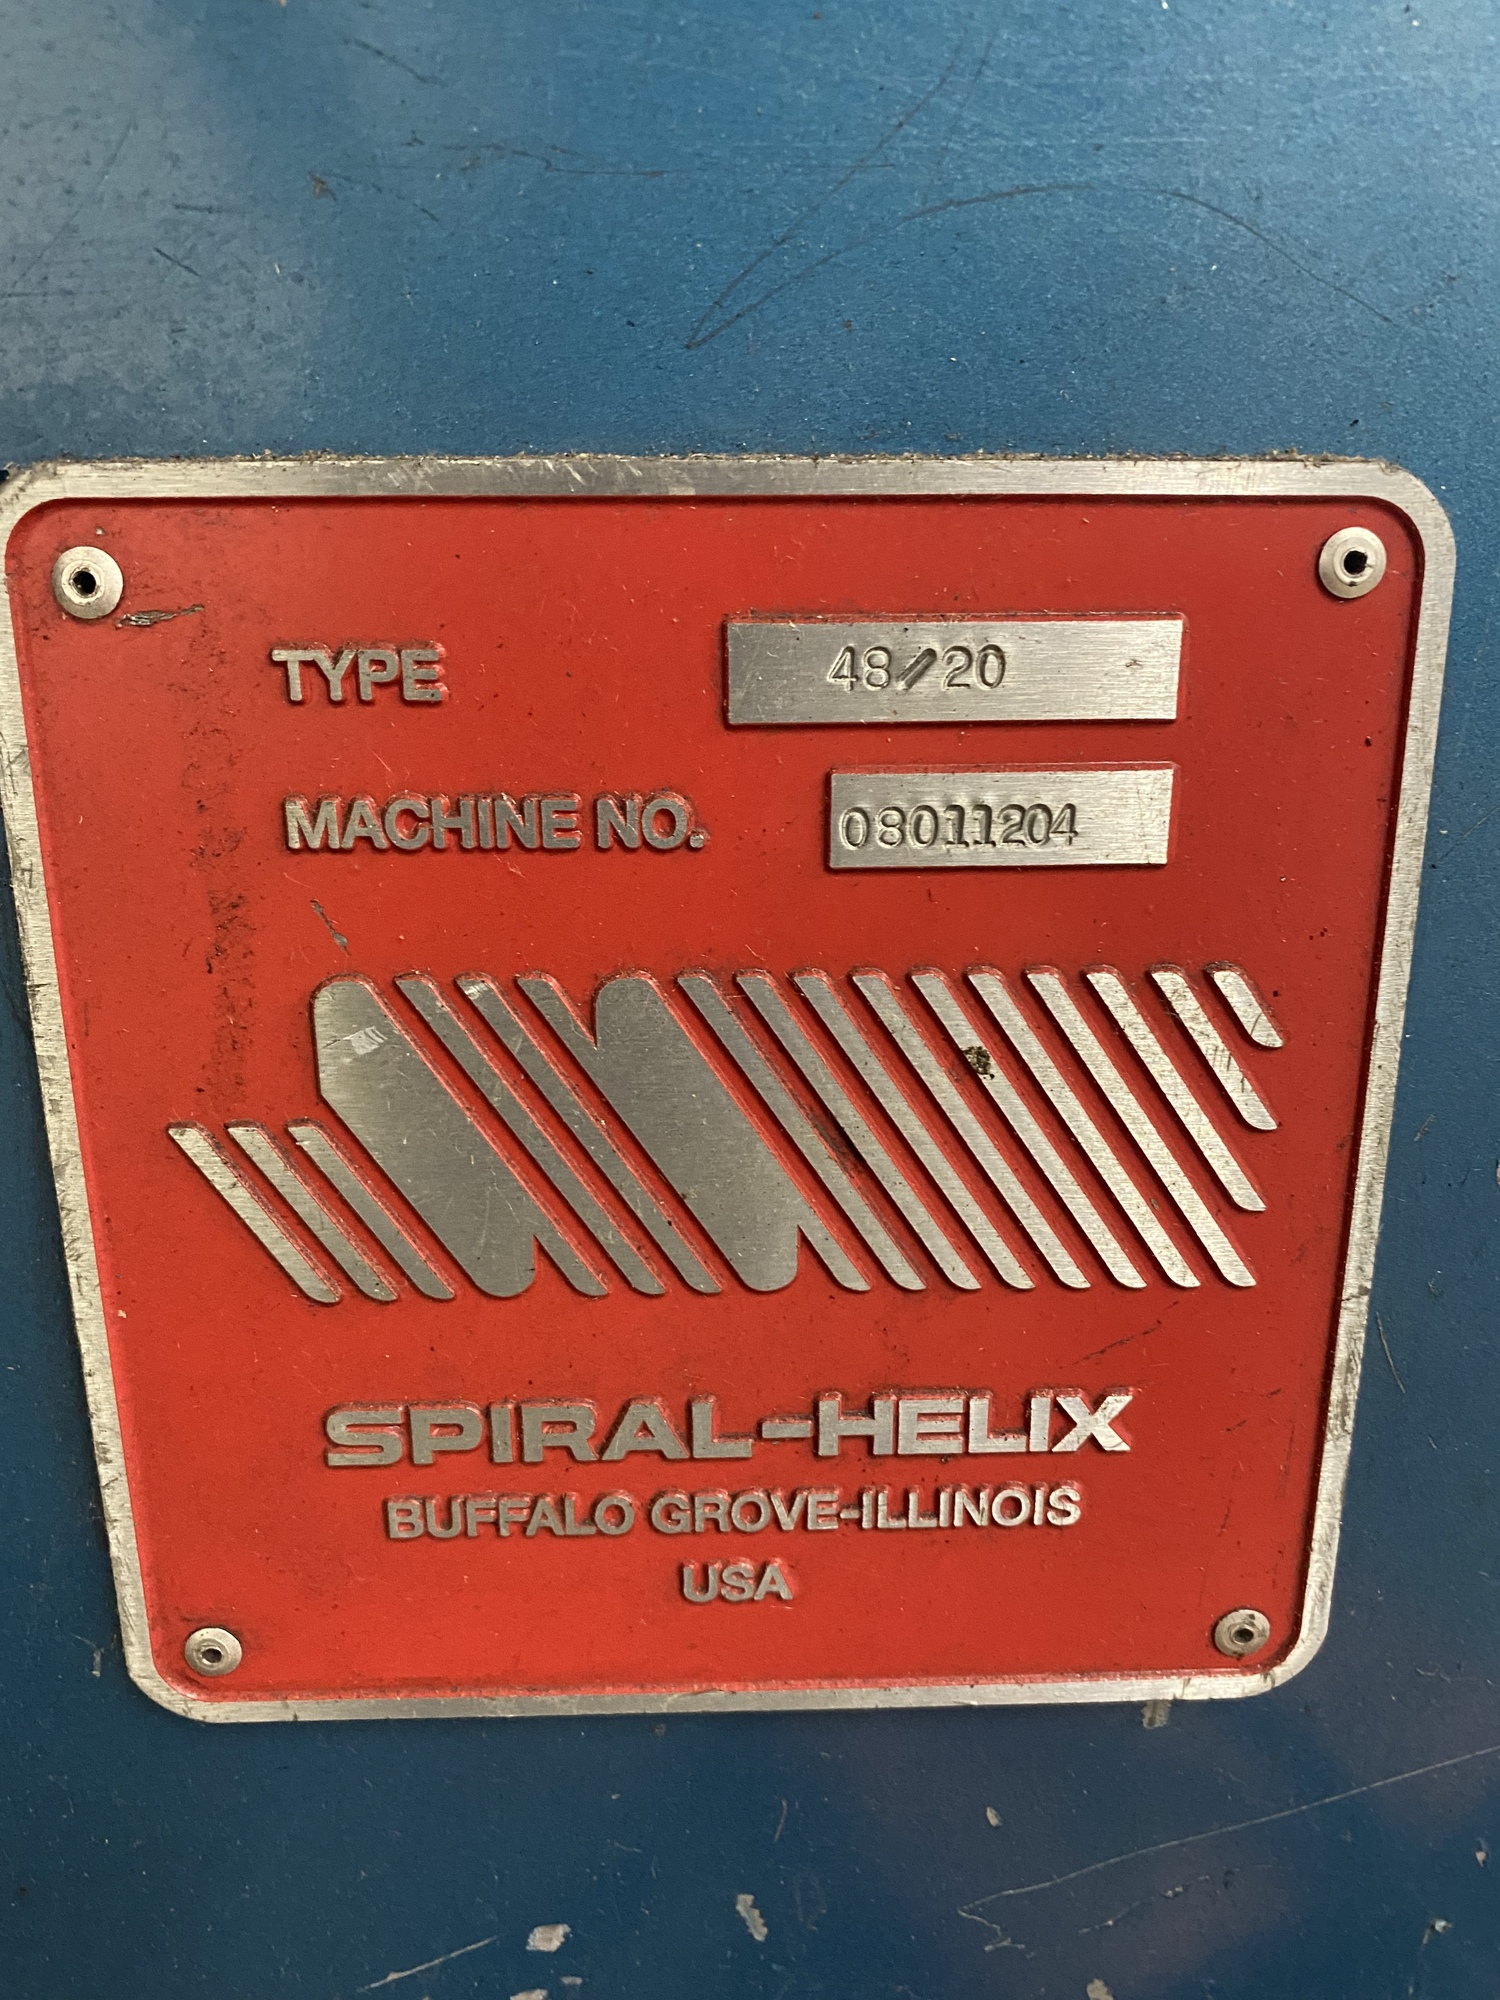 SPIRAL-HELIX Roval Roller Elbow Machines | THREE RIVERS MACHINERY